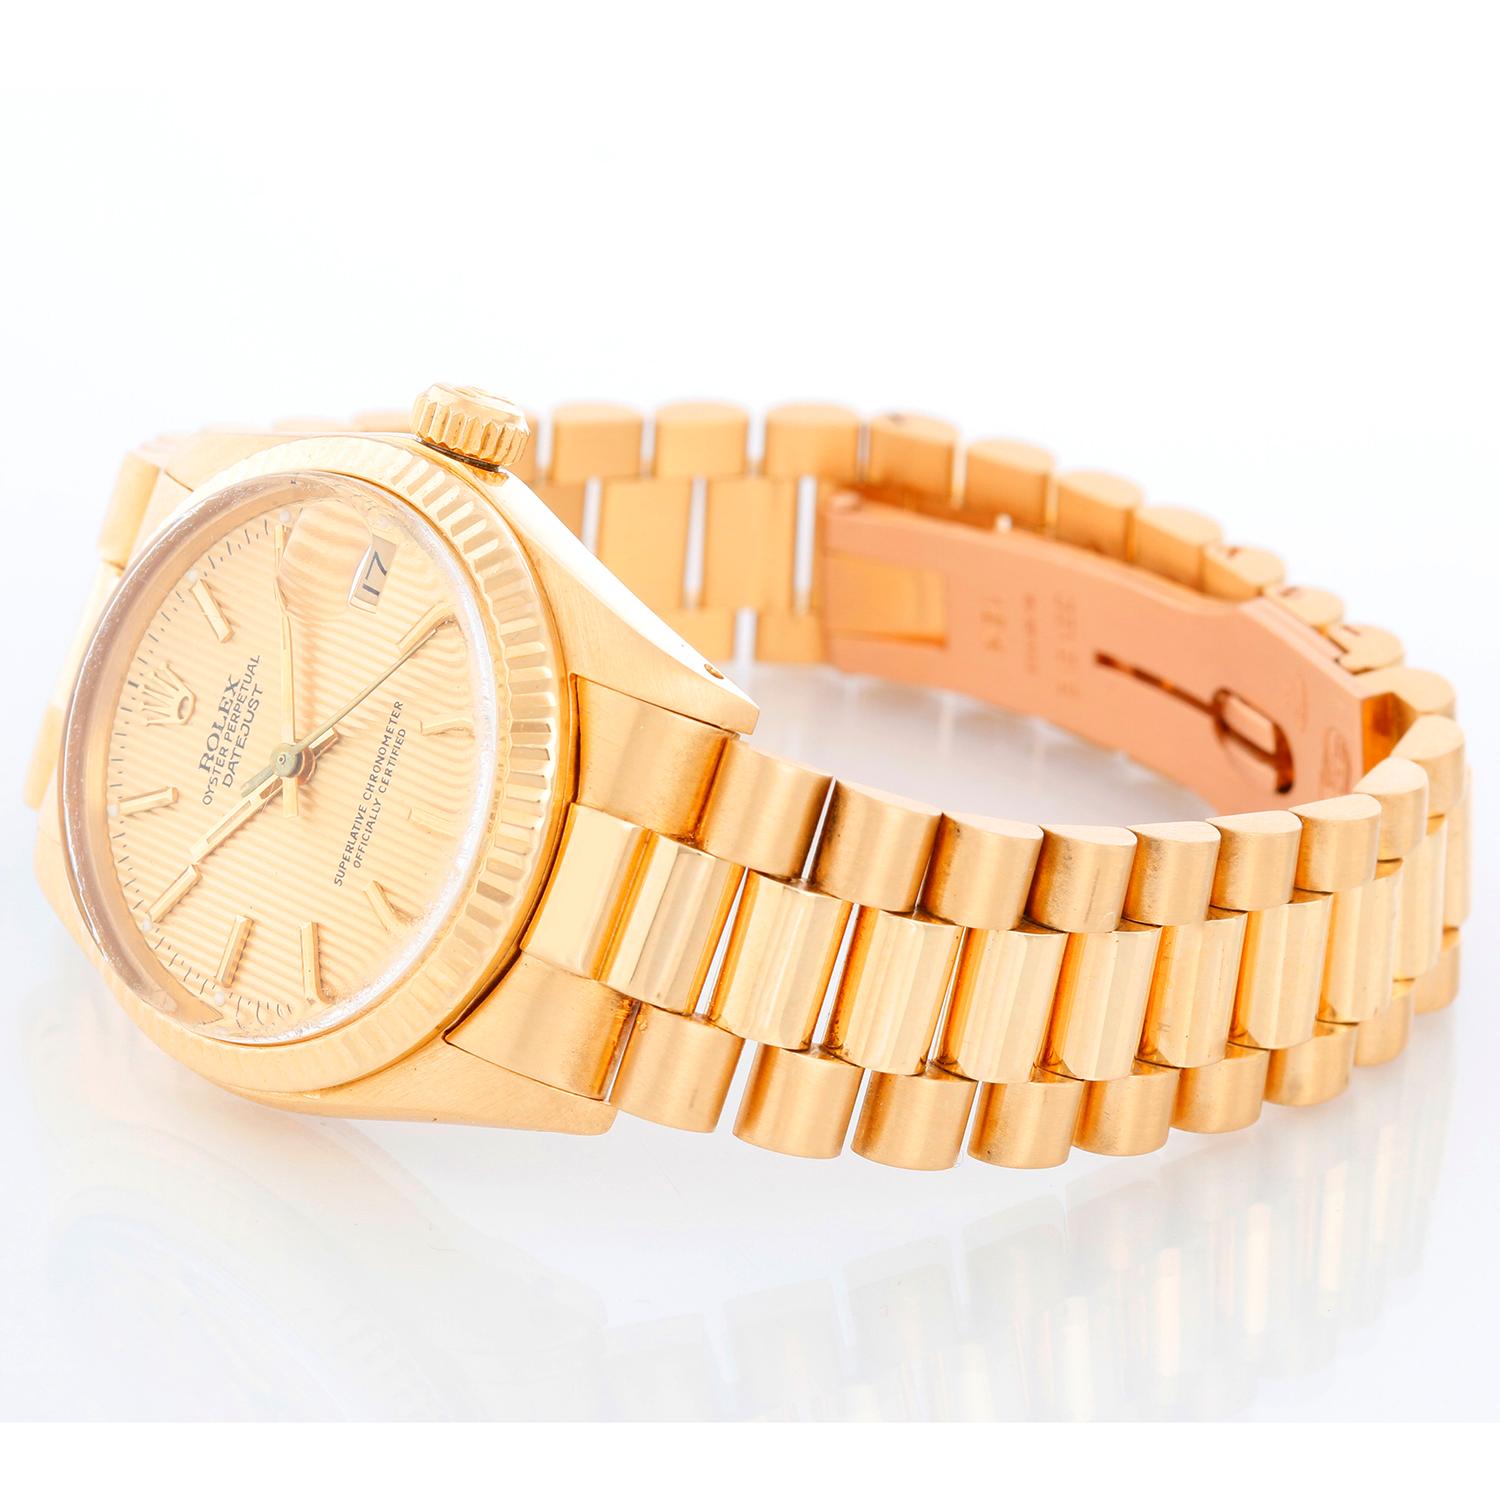 Rolex President Midsize 18K Yellow Gold Watch 6827 - Automatic winding. 18K Yellow gold l (31mm diameter). Champagne Tapestry dial with gold stick markers. 18K Yellow gold President bracelet. Pre-owned with box. 